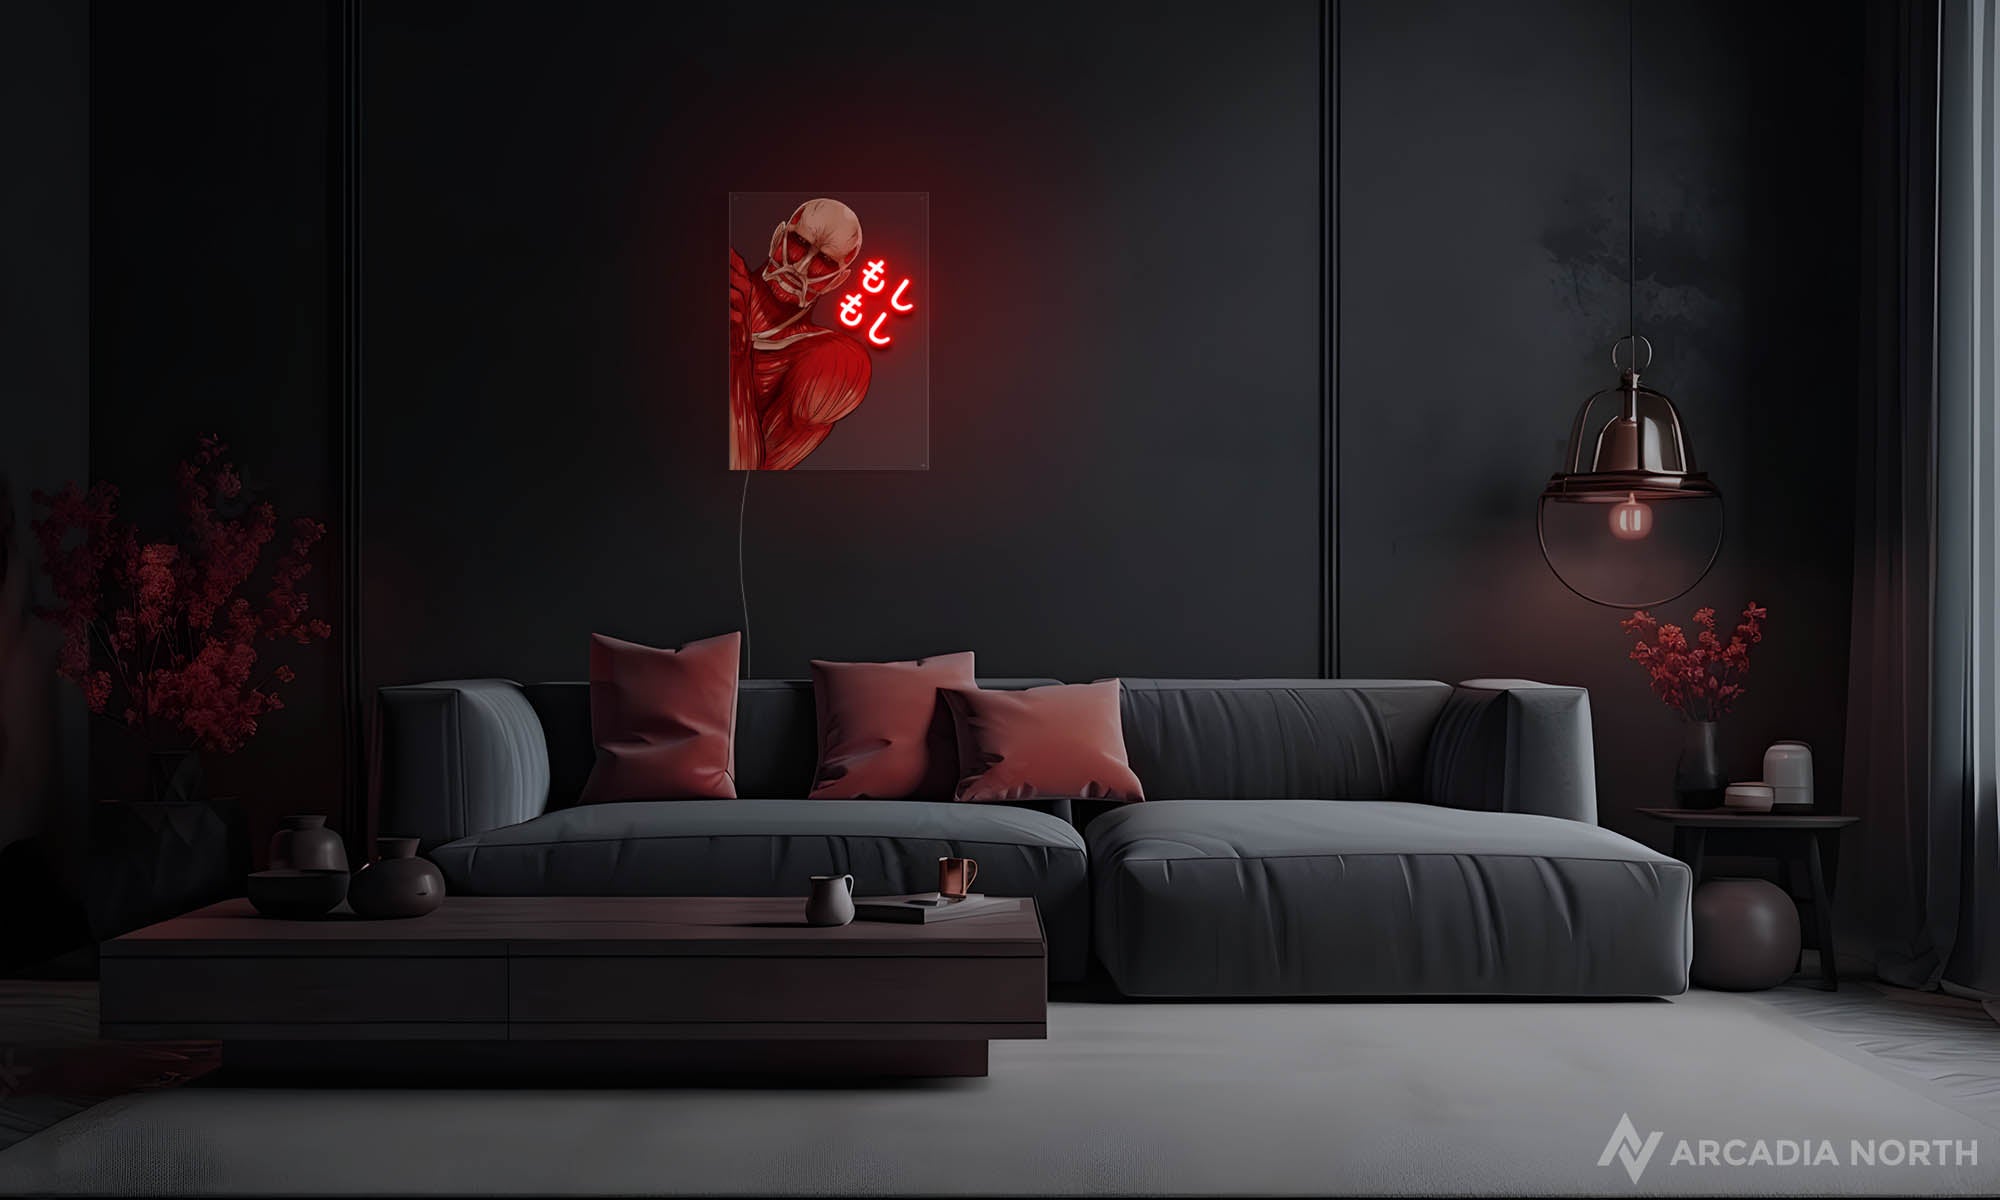 Modern living room with an Arcadia North LED Poster based on the anime Attack on Titan depicting the meme moshi moshi titan